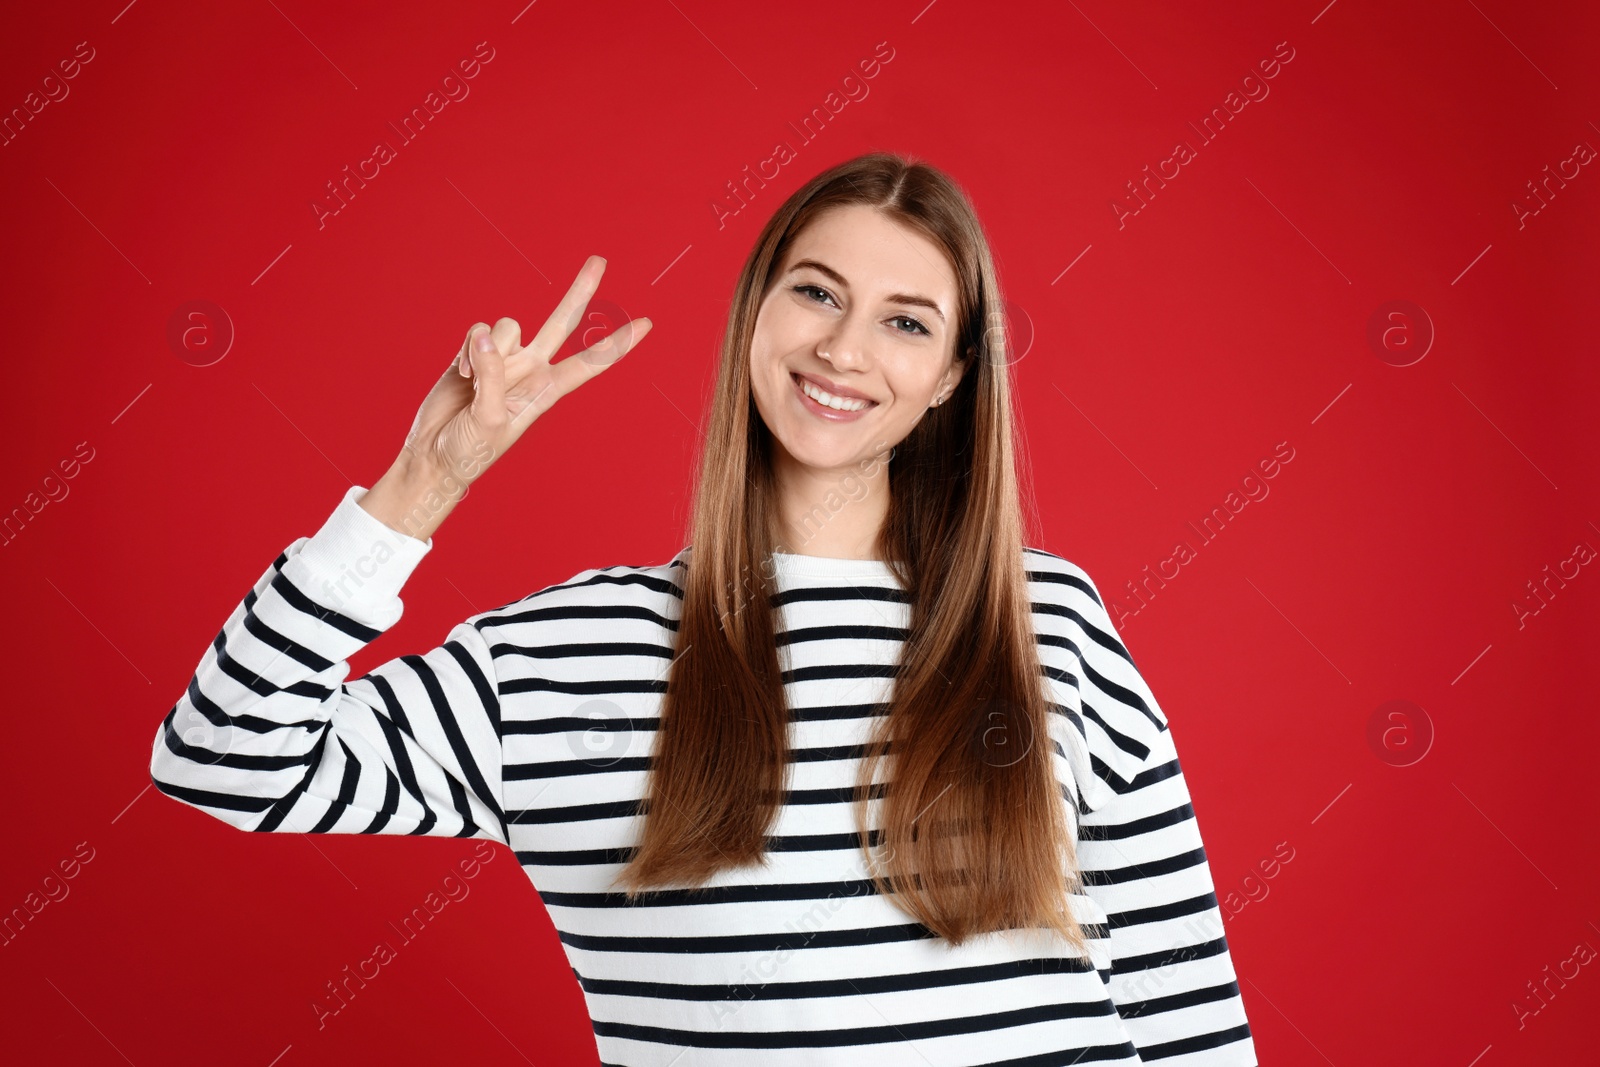 Photo of Woman showing number two with her hand on red background